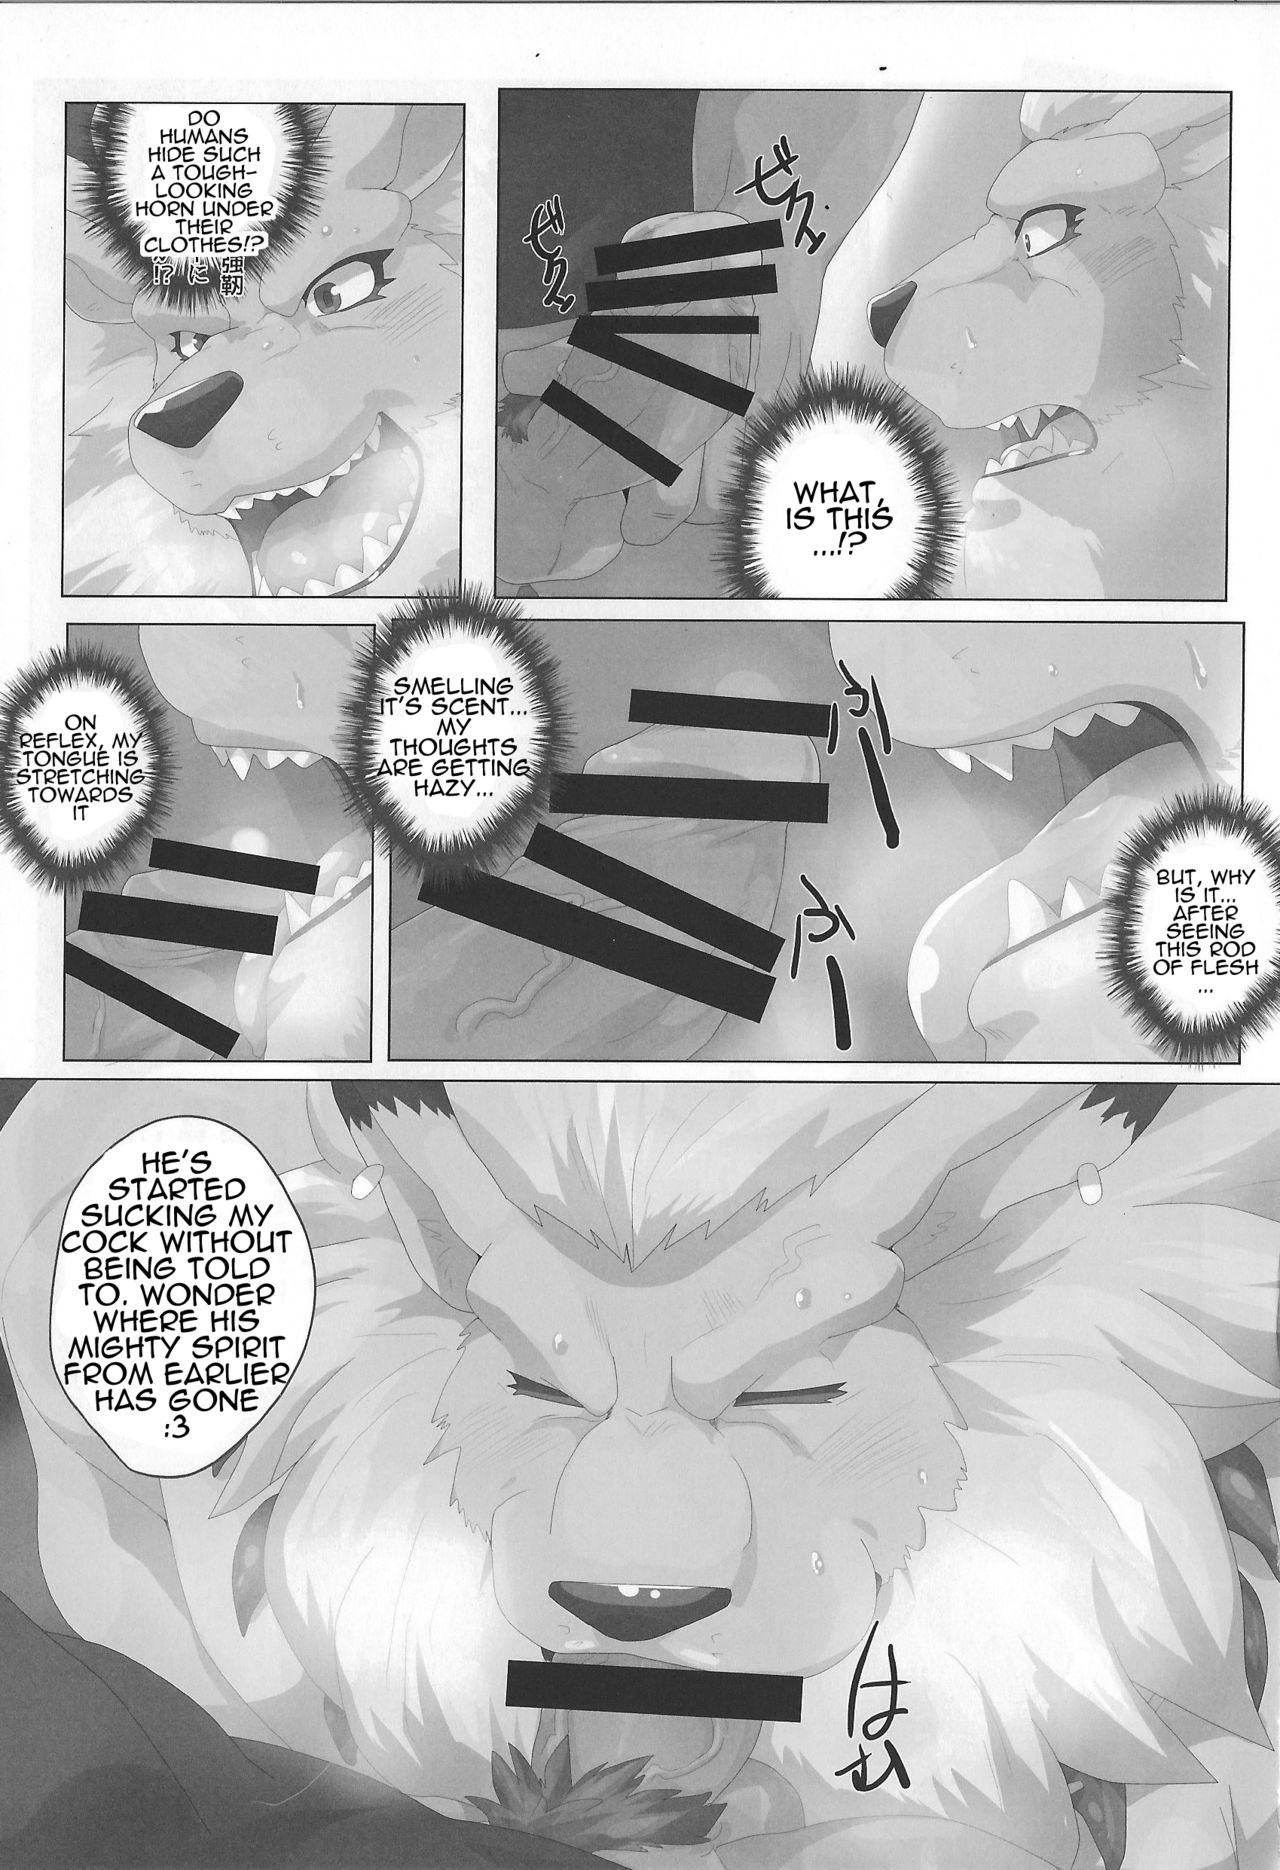 [Debirobu] For the Lion-Man Type Electric Life Form to Overturn Fate - Leomon Doujin [ENG] 11